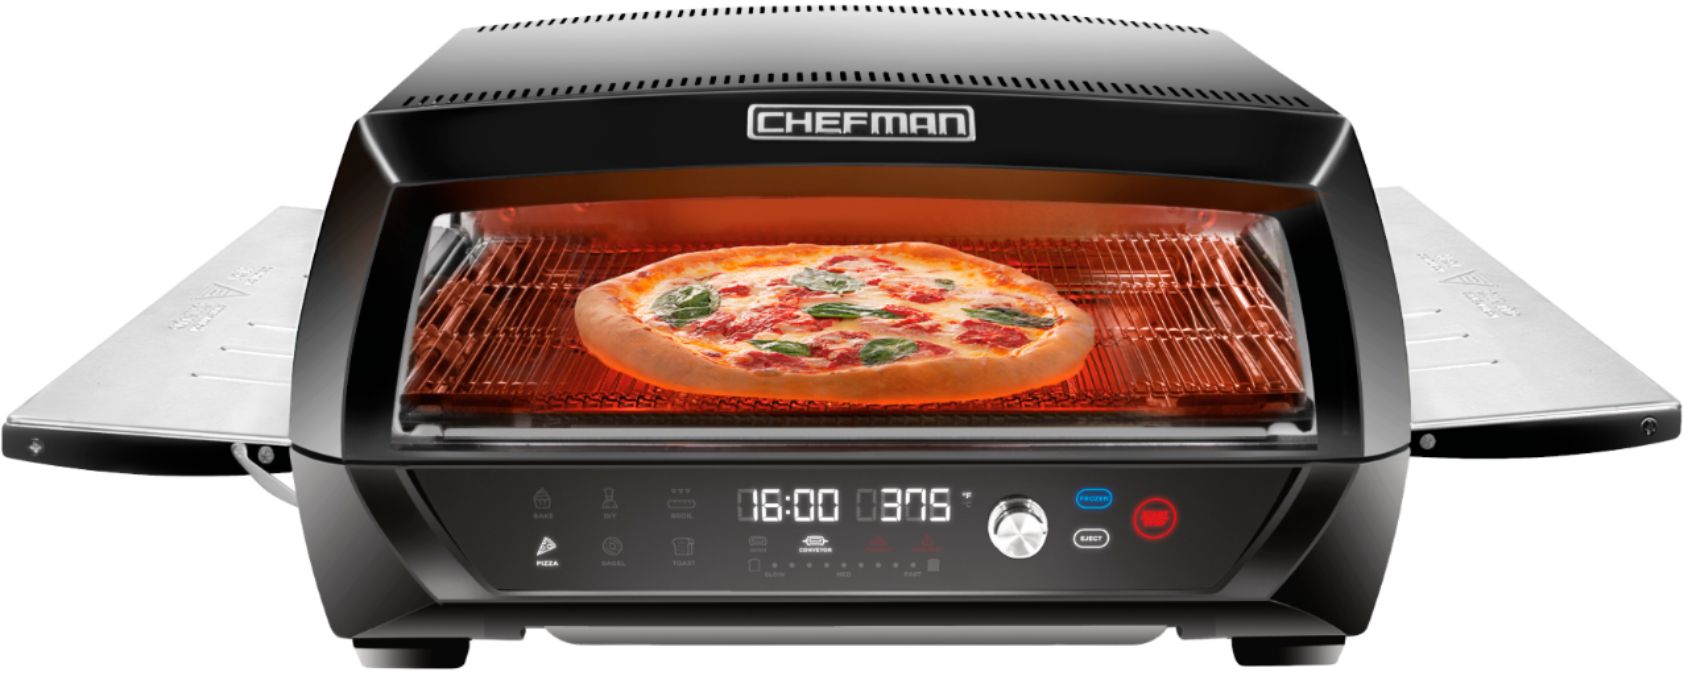 Angle View: Chefman Food Mover Conveyor Toaster Oven - Black/Stainless Steel